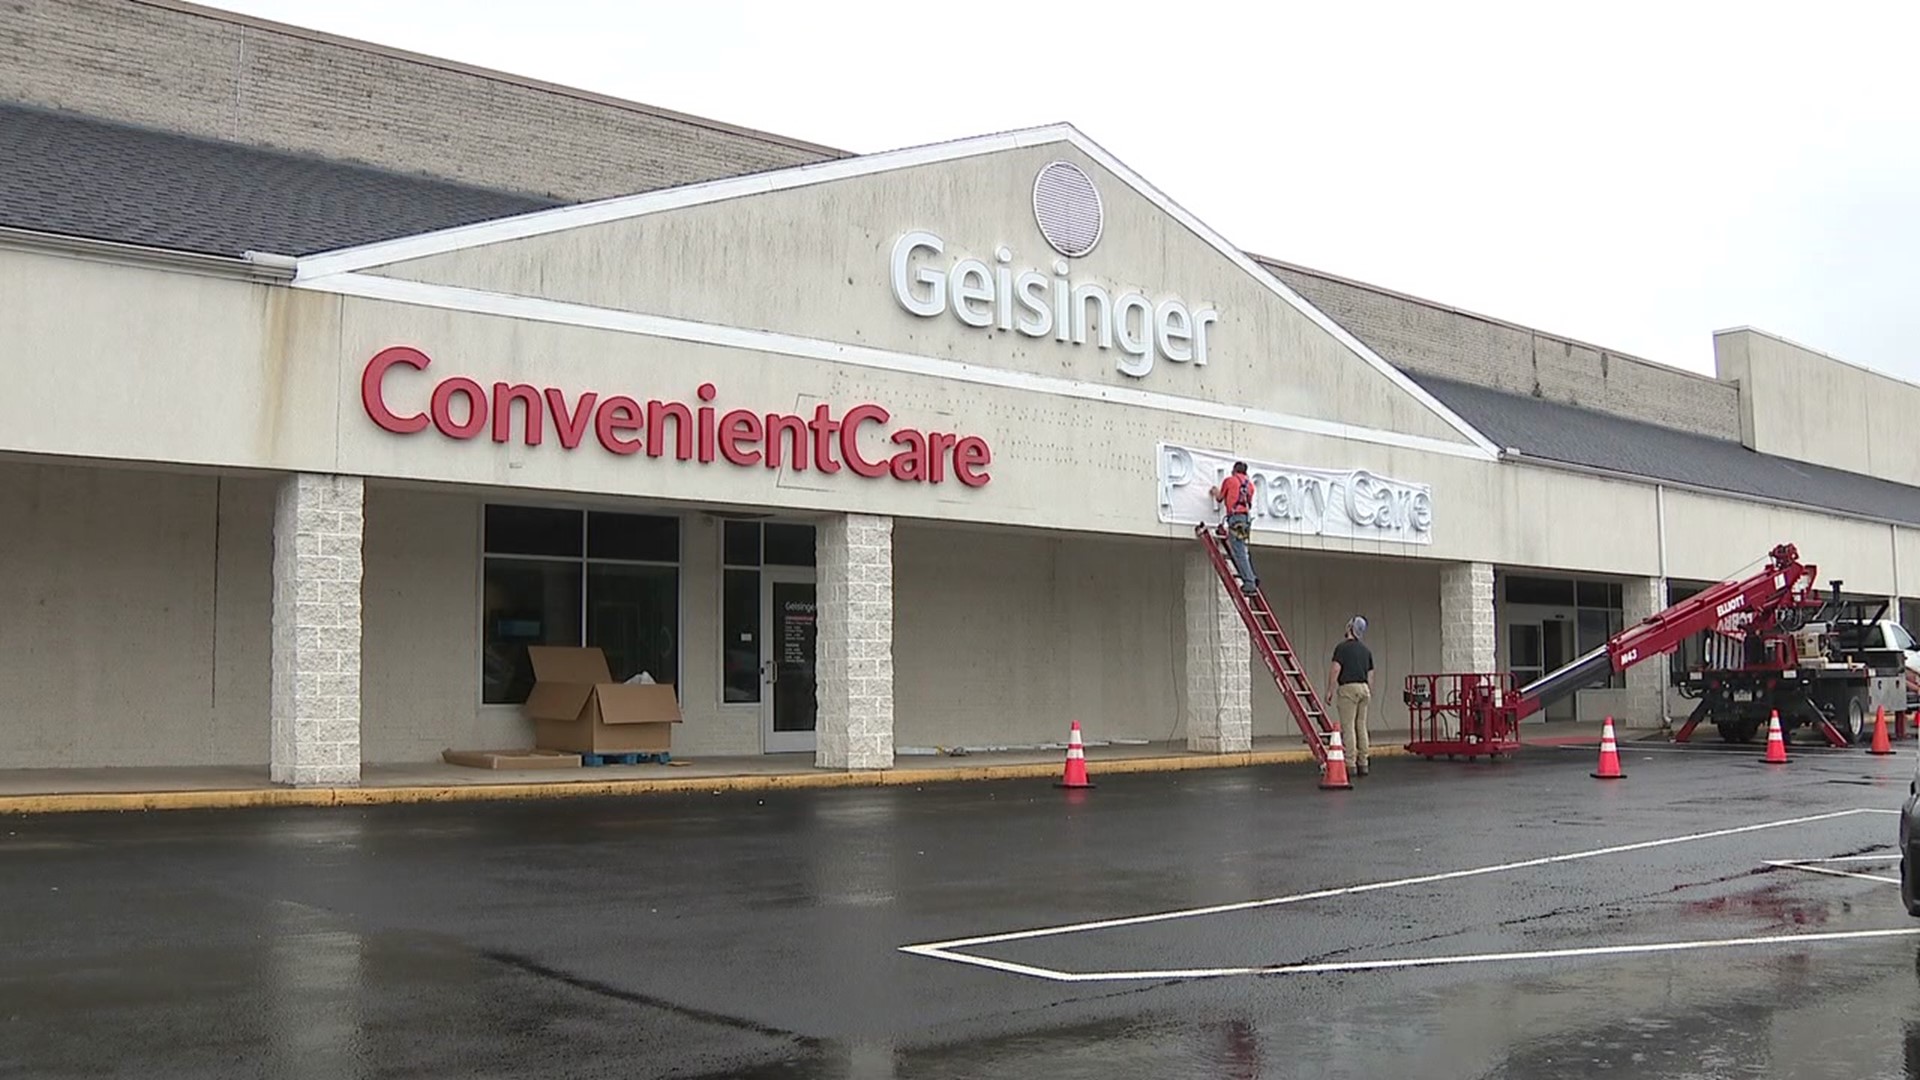 Geisinger is opening a facility with doctors' offices and a convenient-care clinic